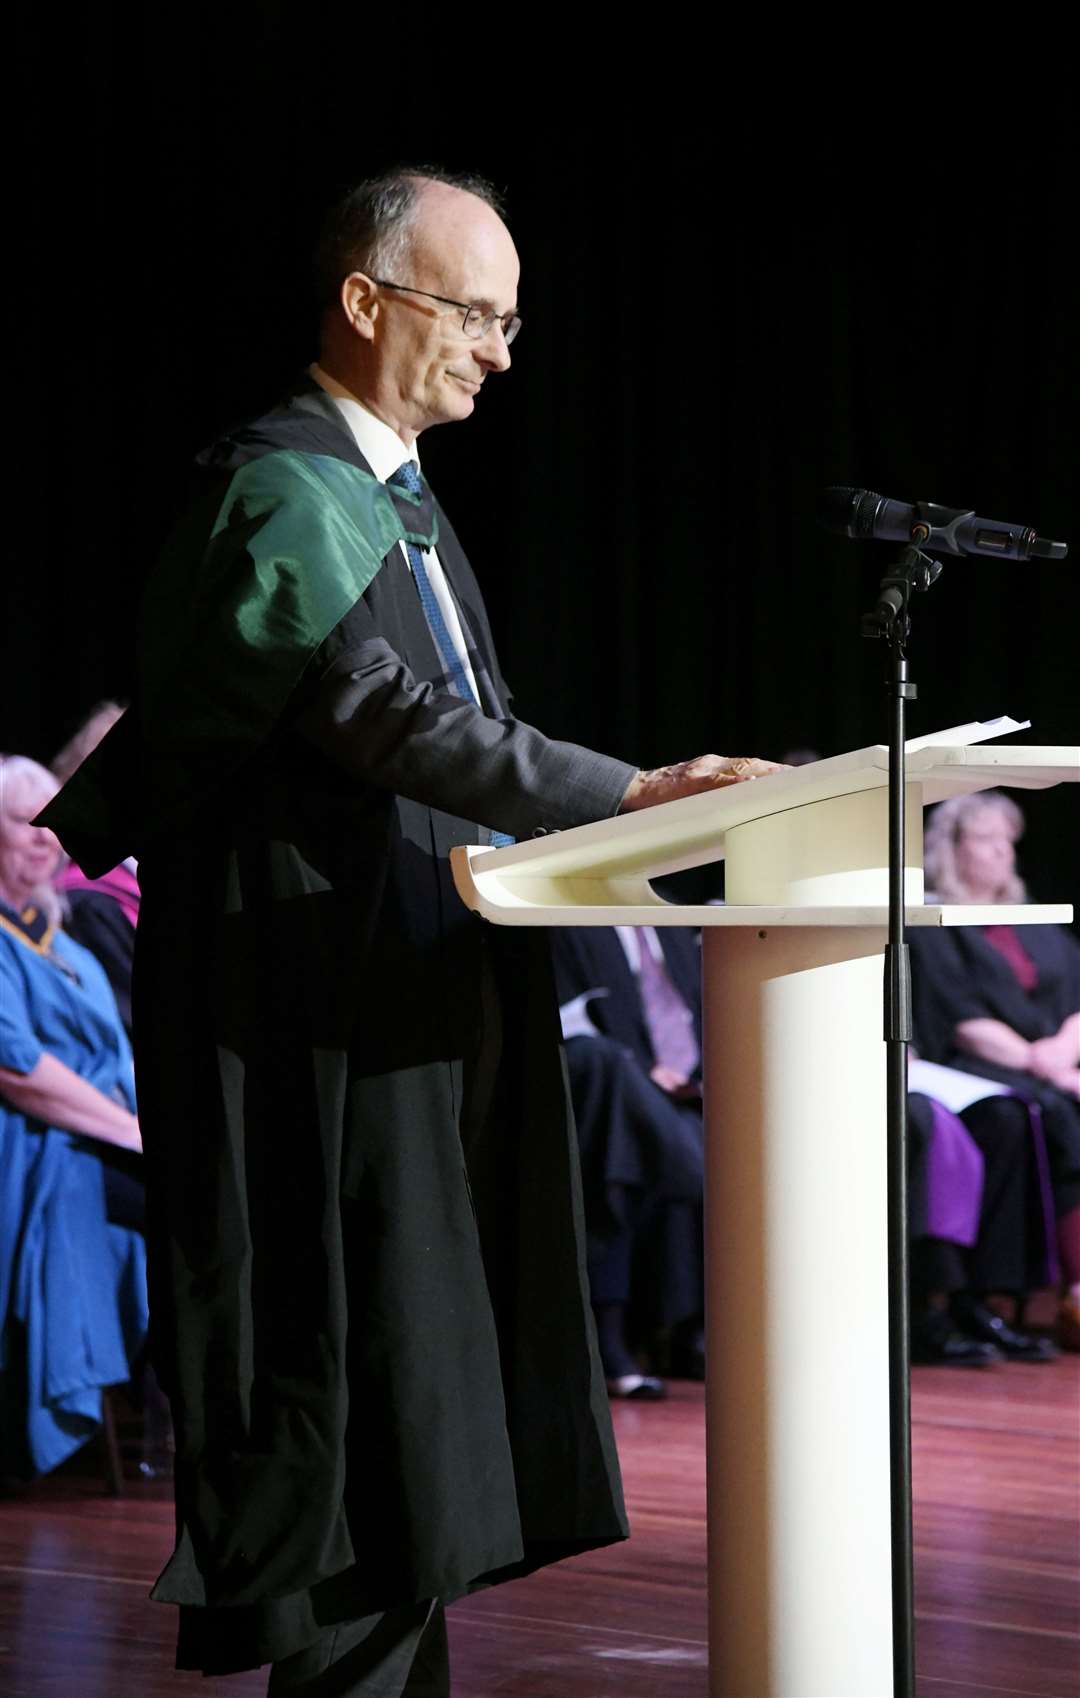 David Patterson, Principal and CEO, giving his speech and the presentation of awards at the University of Highlands and Islands Moray graduation ceremony at Elgin Town Hall.Picture: Beth Taylor